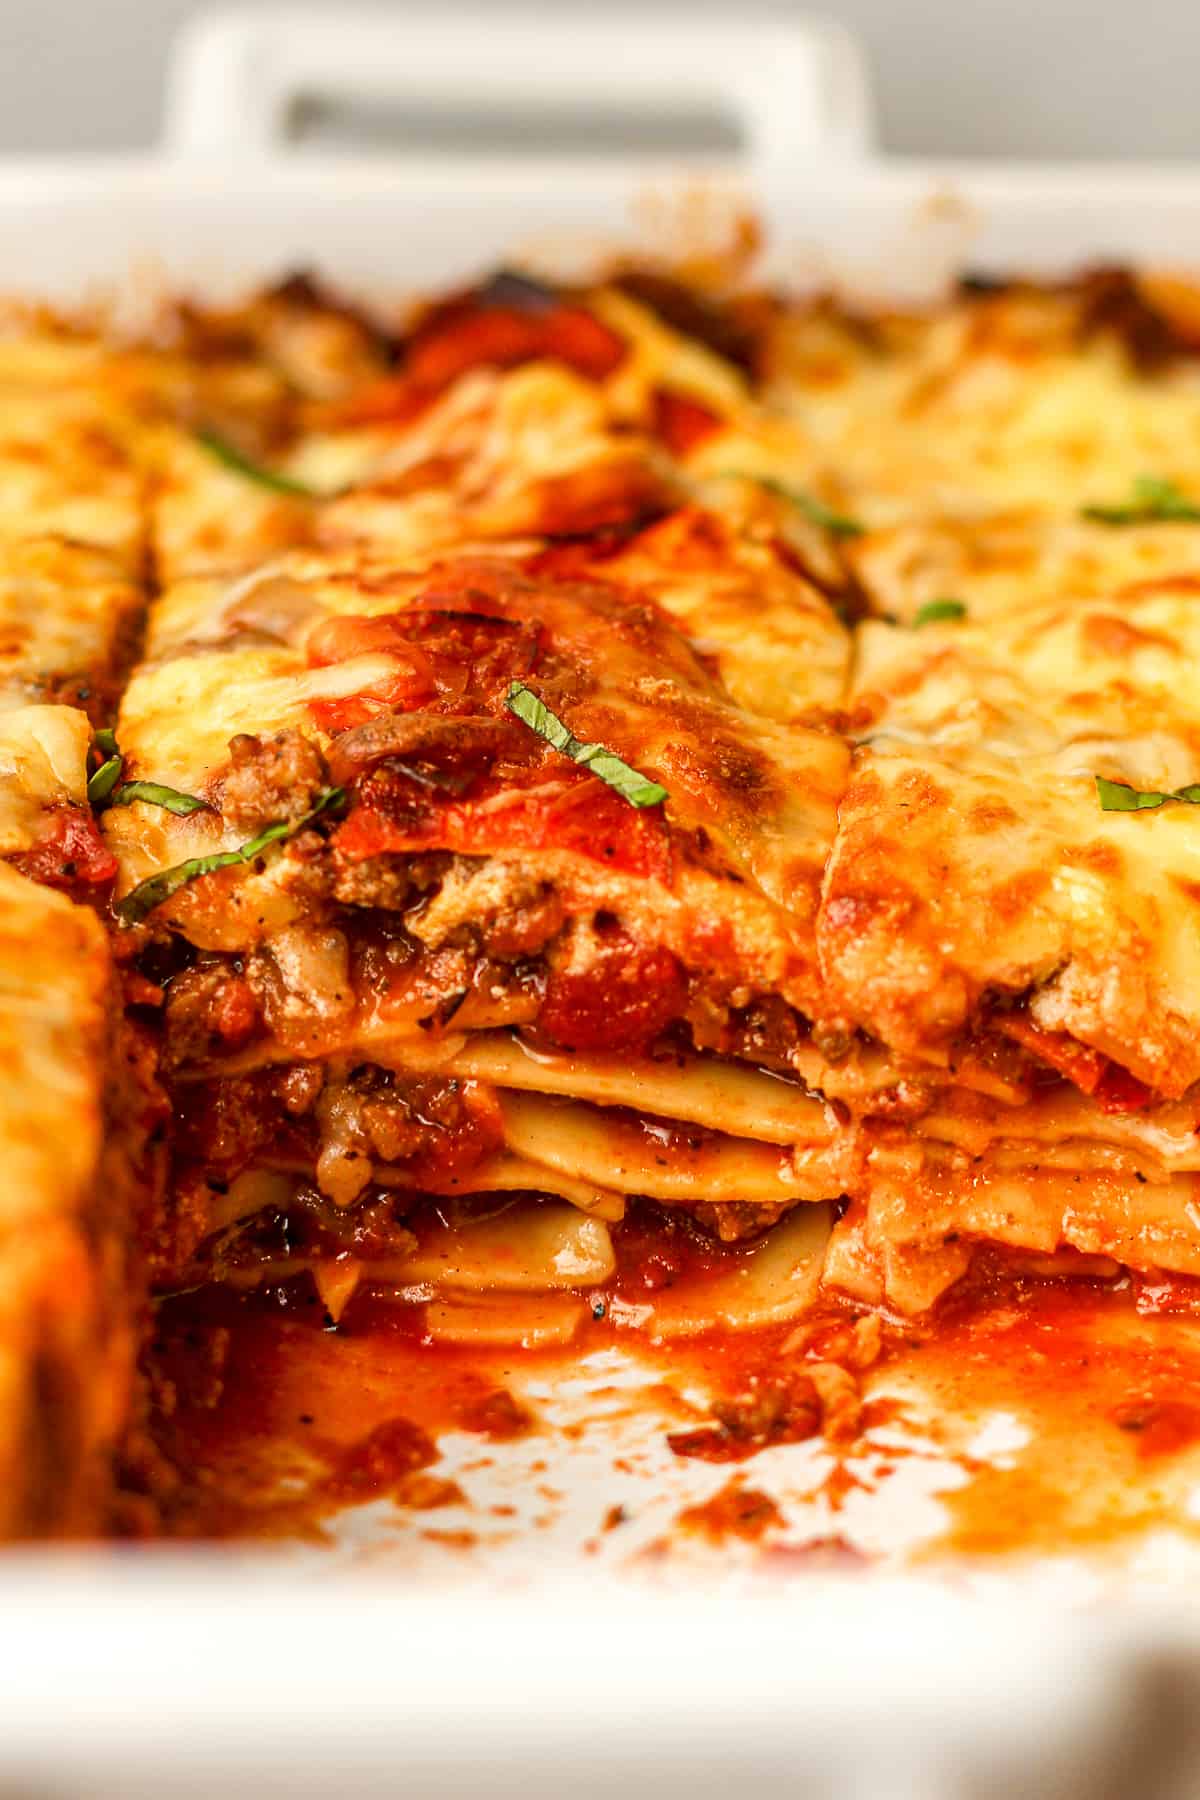 Side view of a partial pan of lasagna, showing the insides.